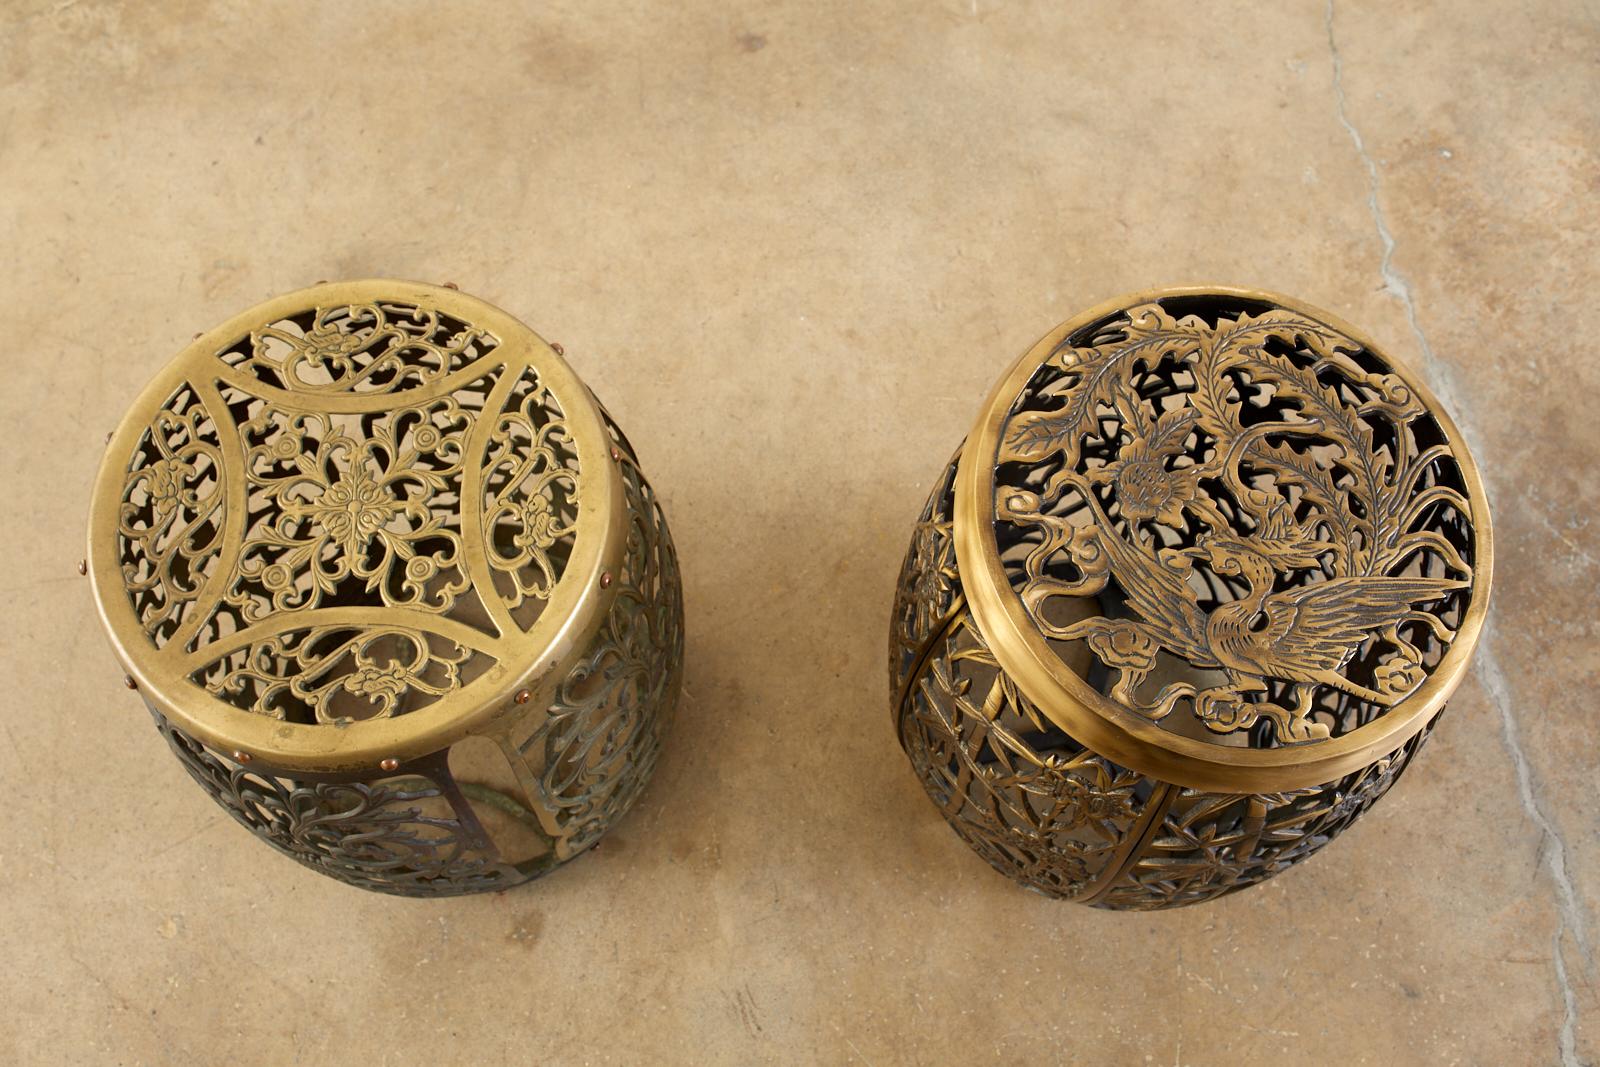 Chinese Export Associated Pair of Asian Brass Garden Stools or Drink Tables